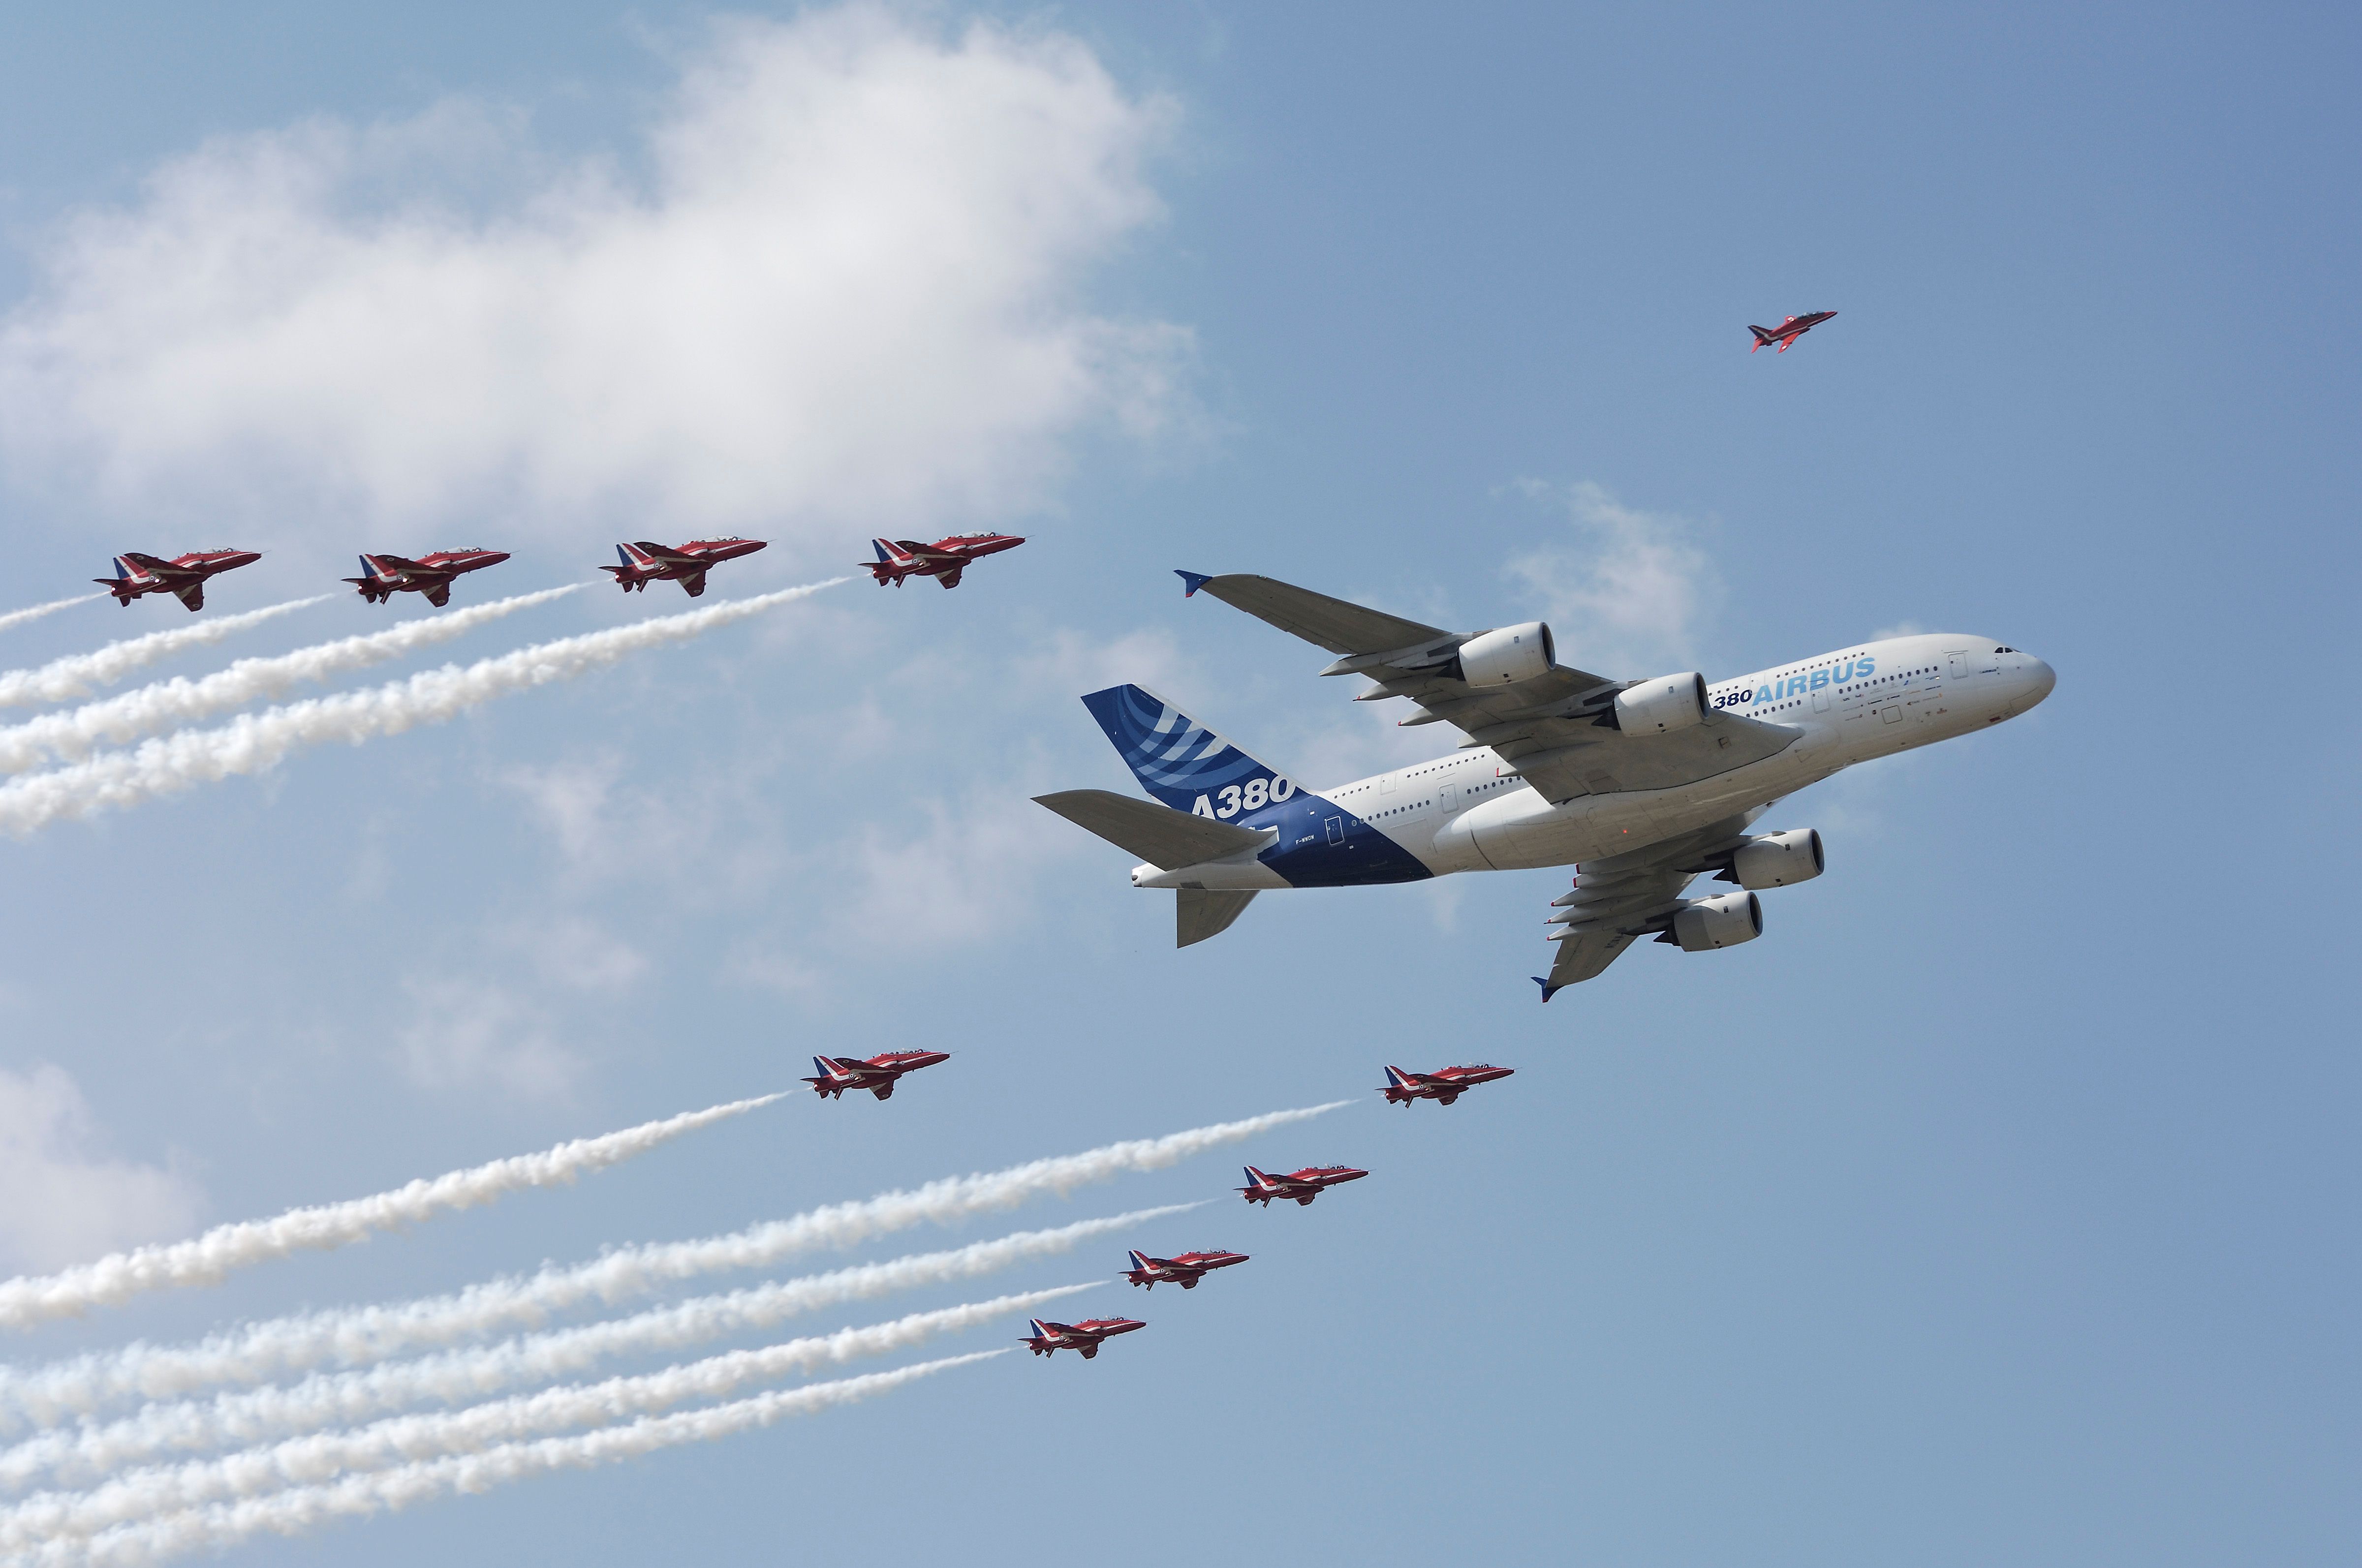 Airbus' protoype Airbus A380 flies in formation with the Red Arrows Getty Images